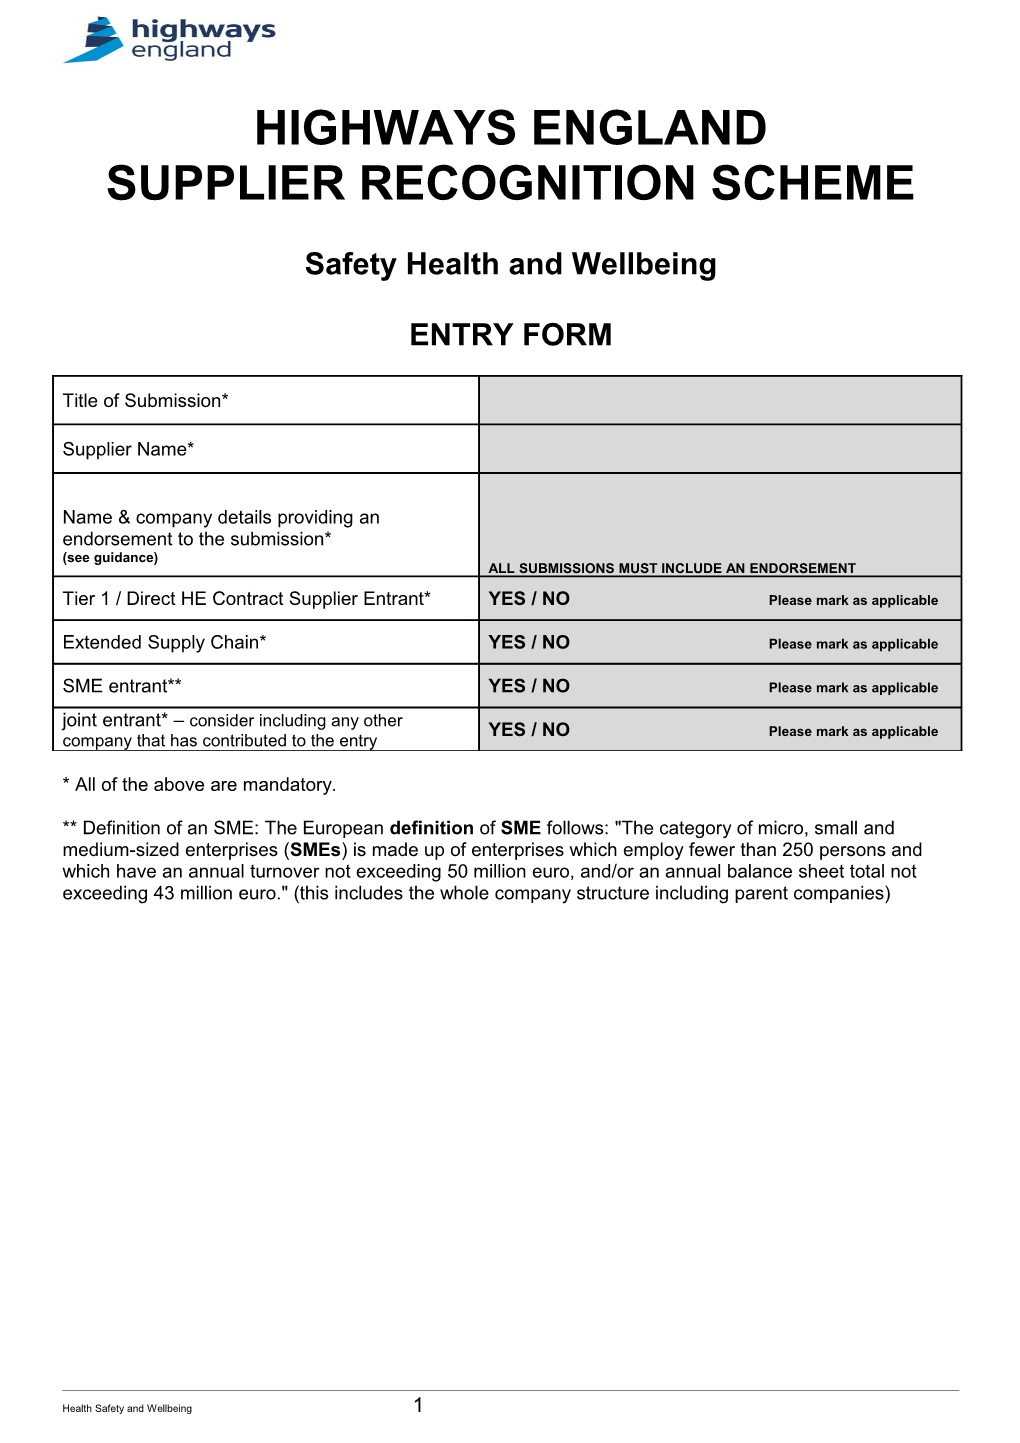 Safety Health and Wellbeing